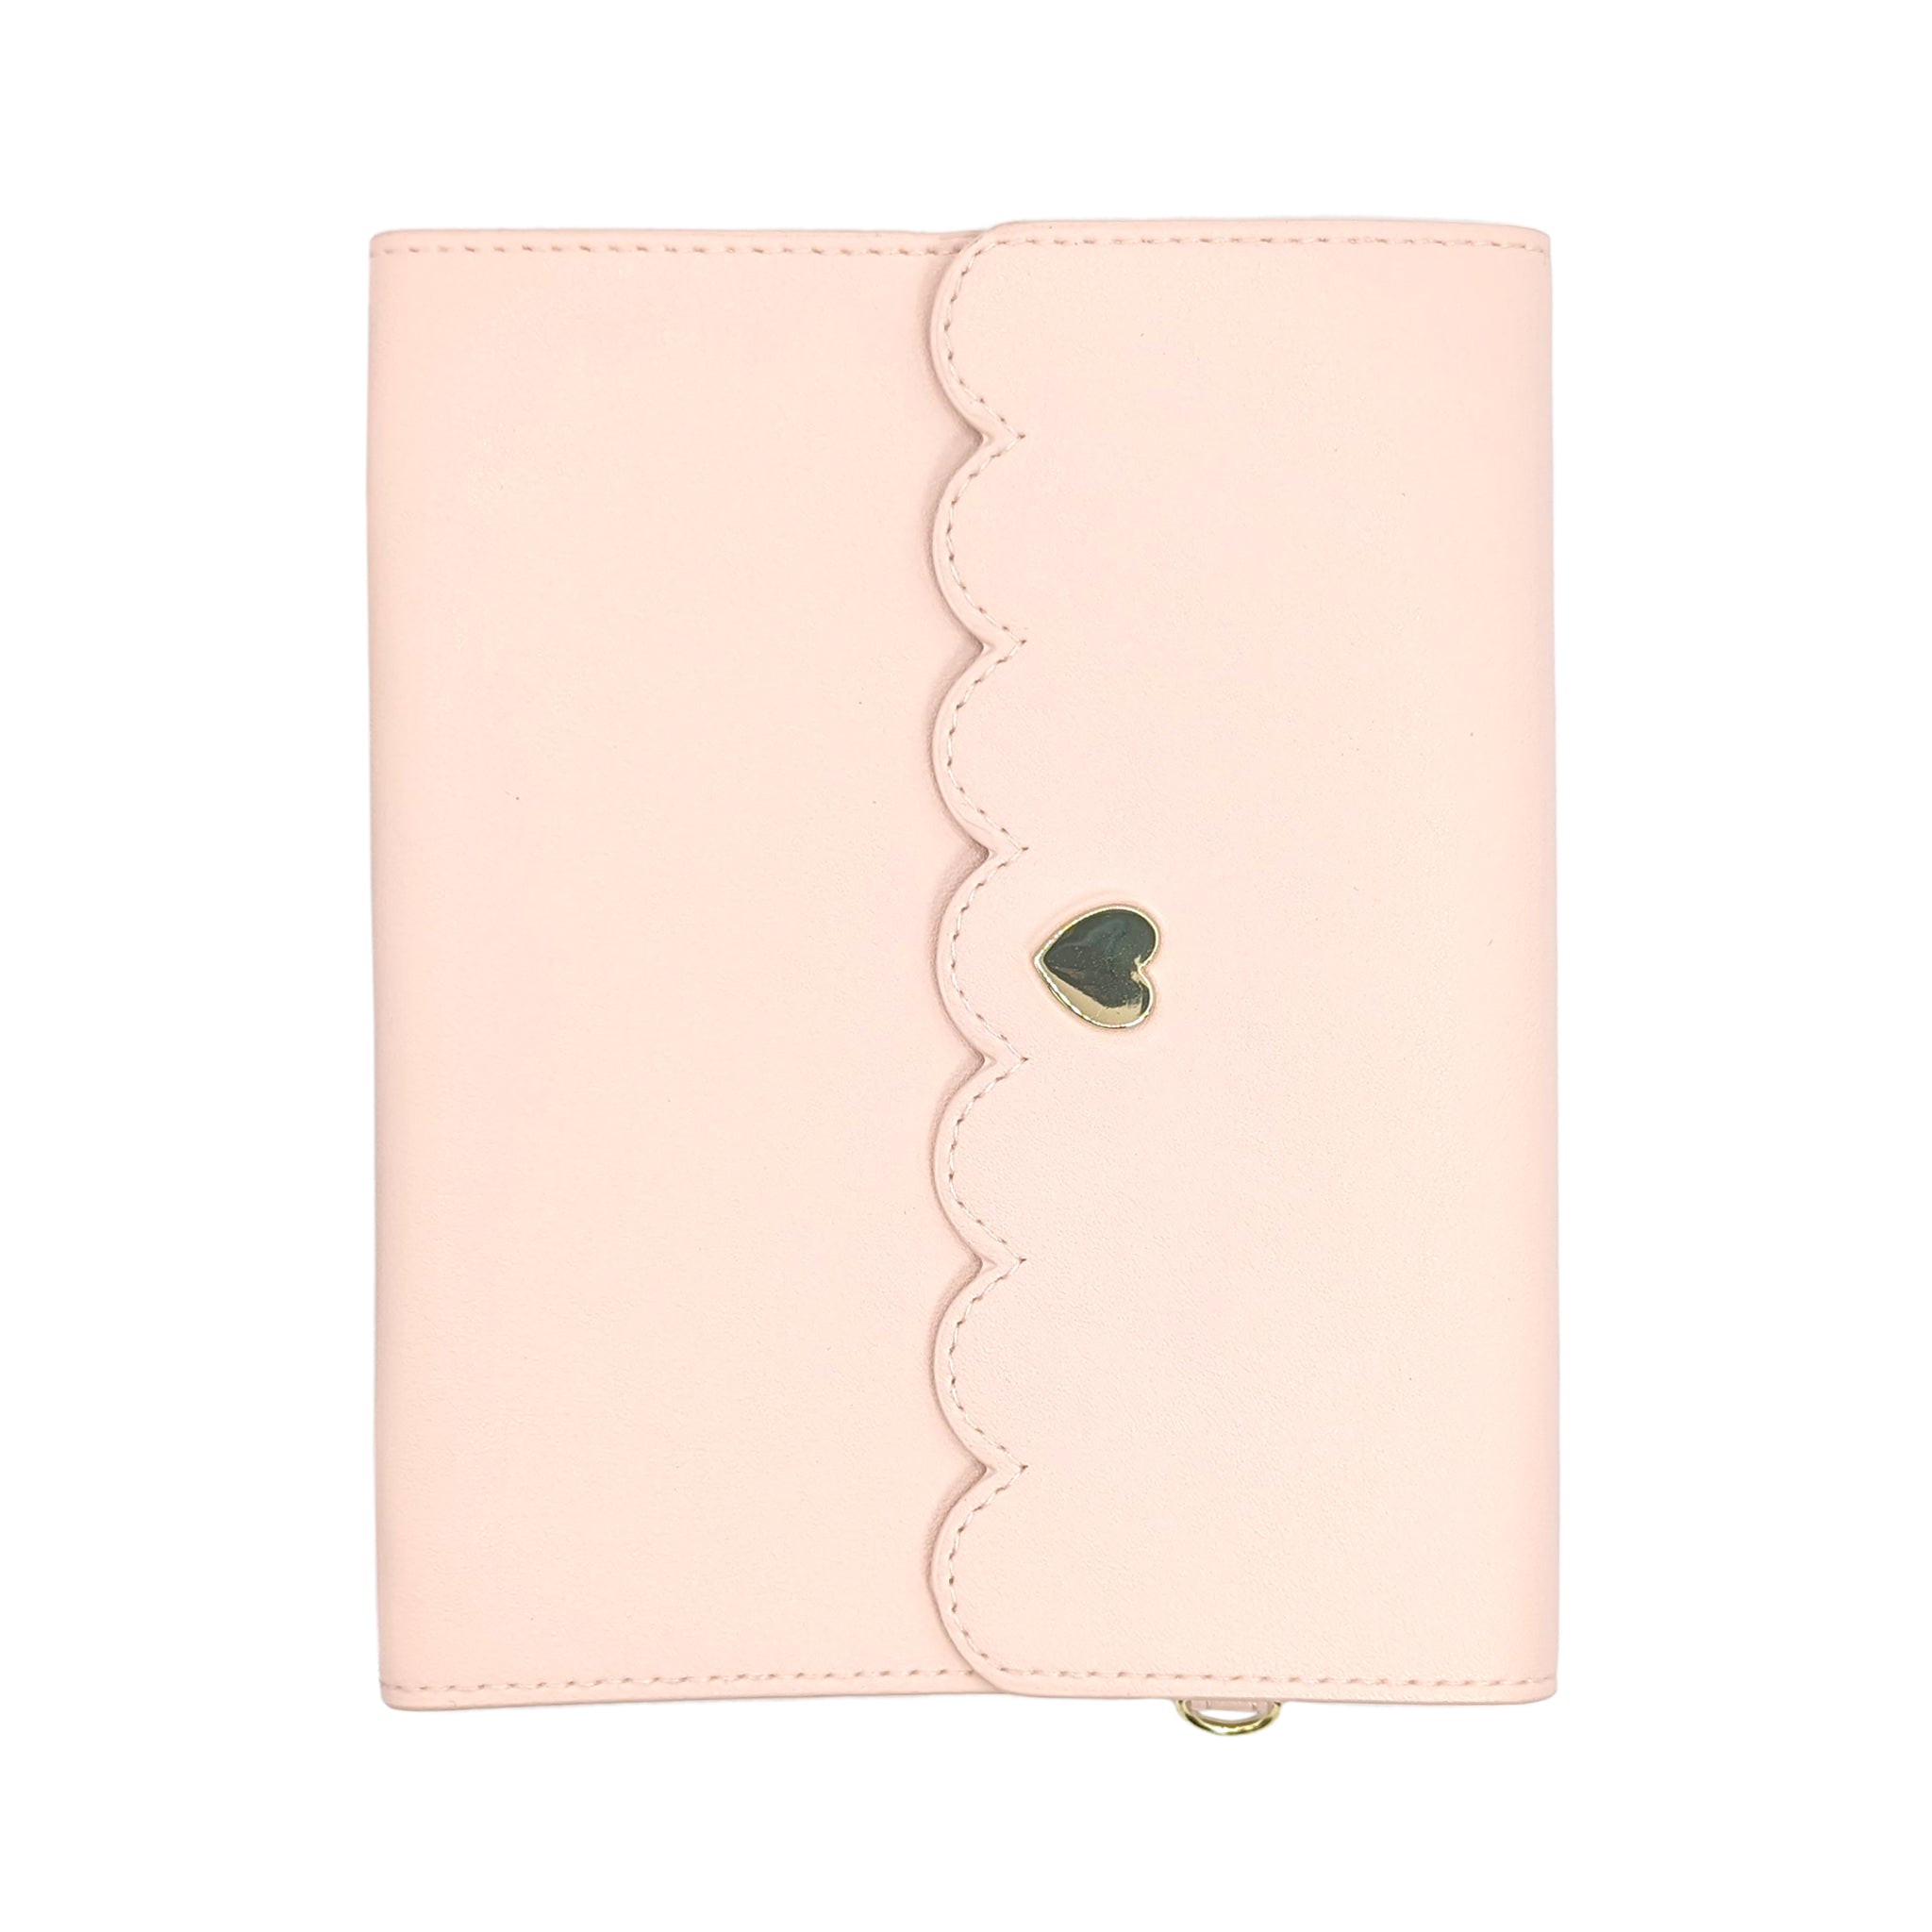 Pink Photo Album with Dotted Bow: Simply Charming